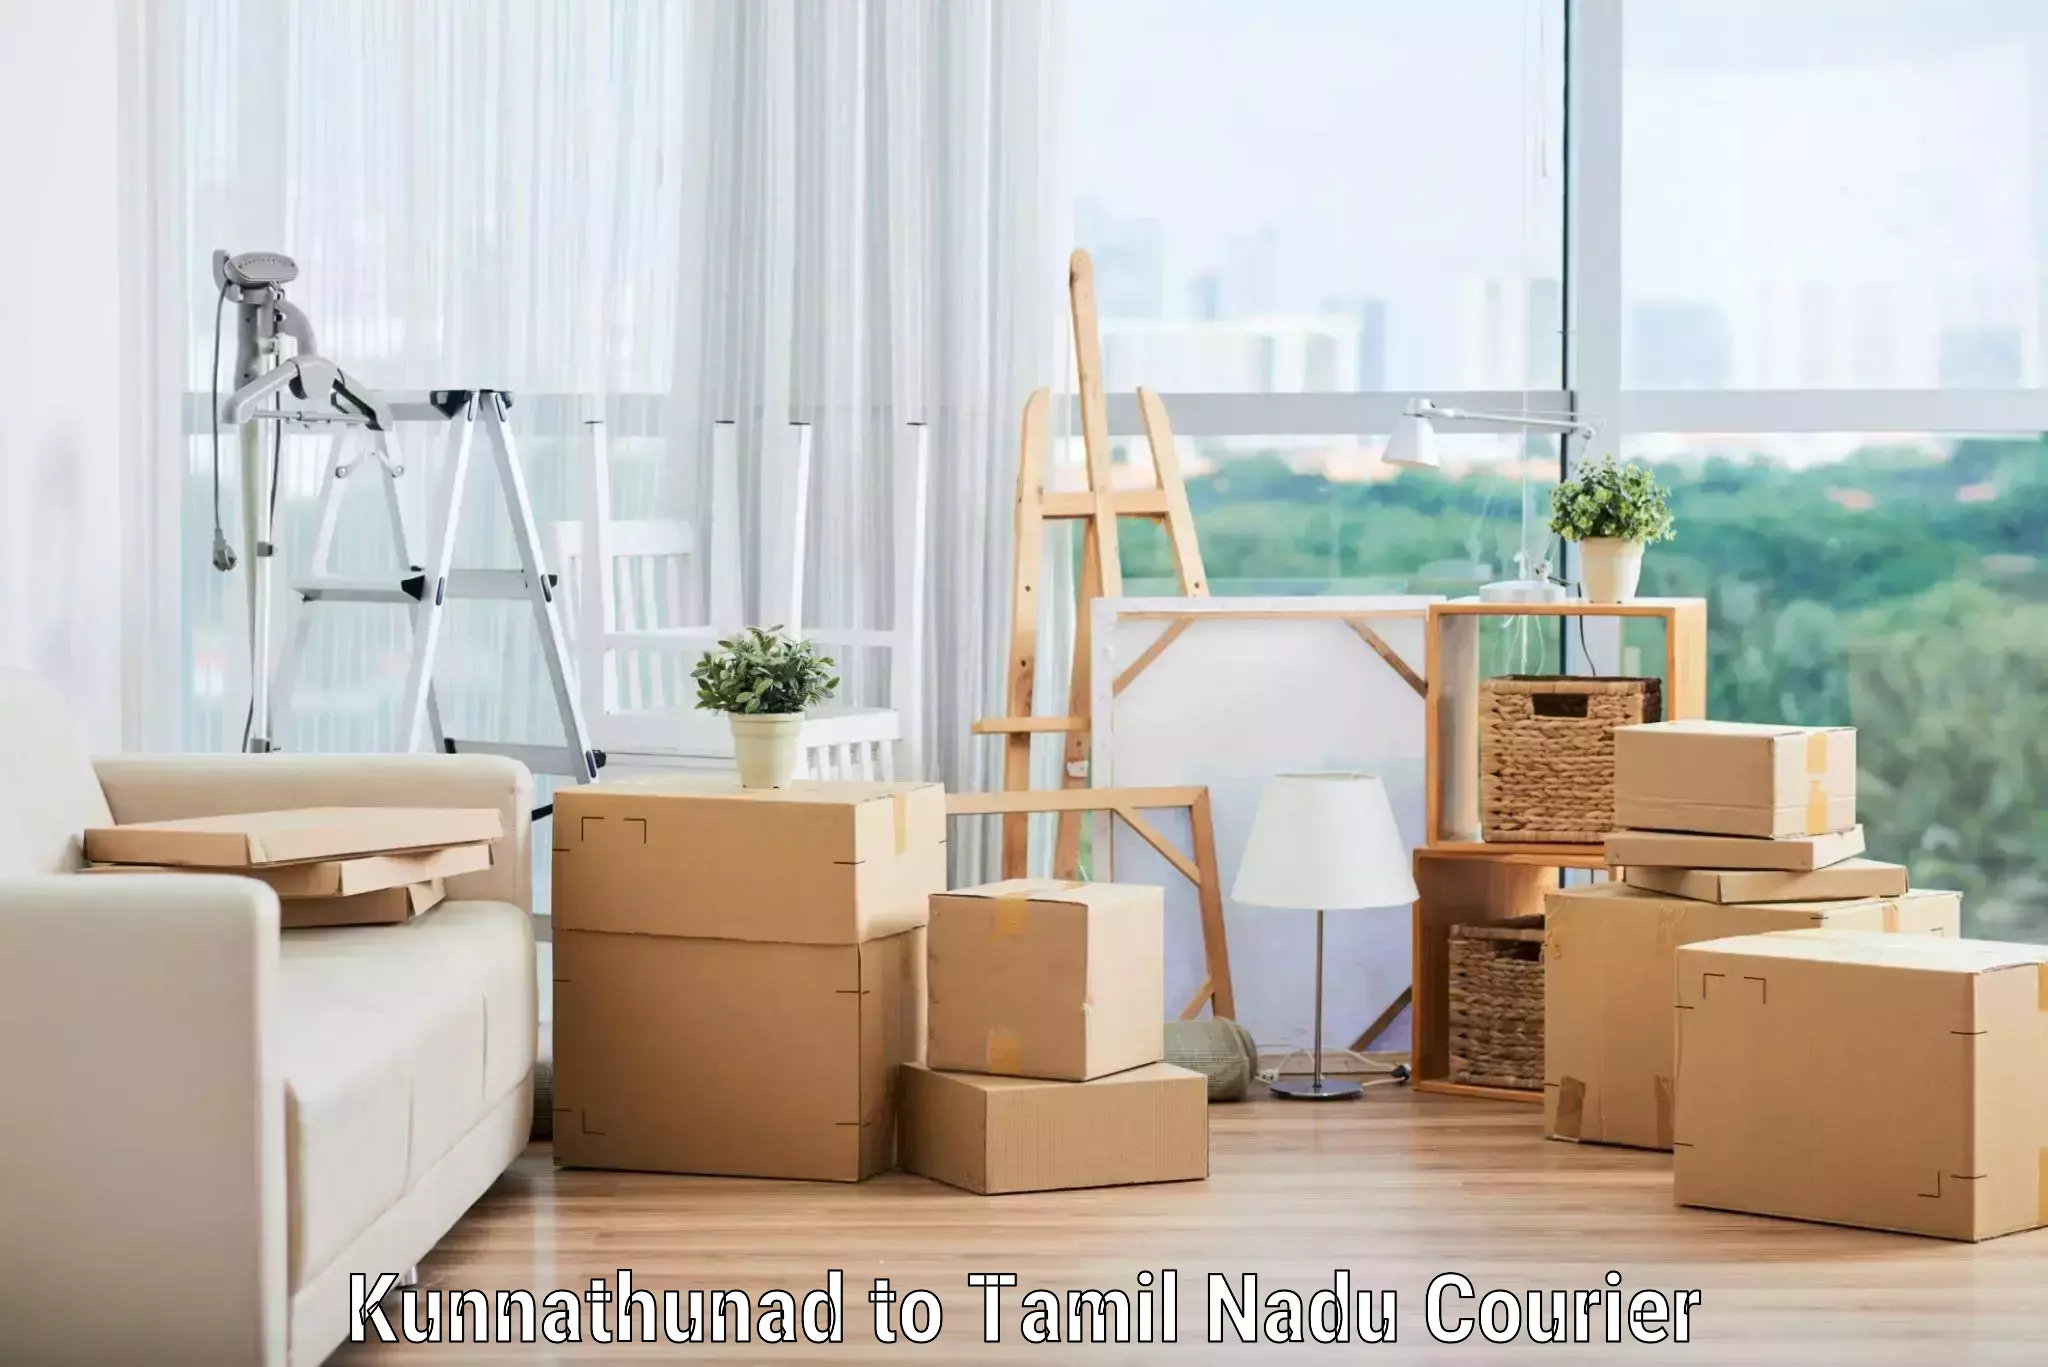 Trusted relocation experts Kunnathunad to Tamil Nadu